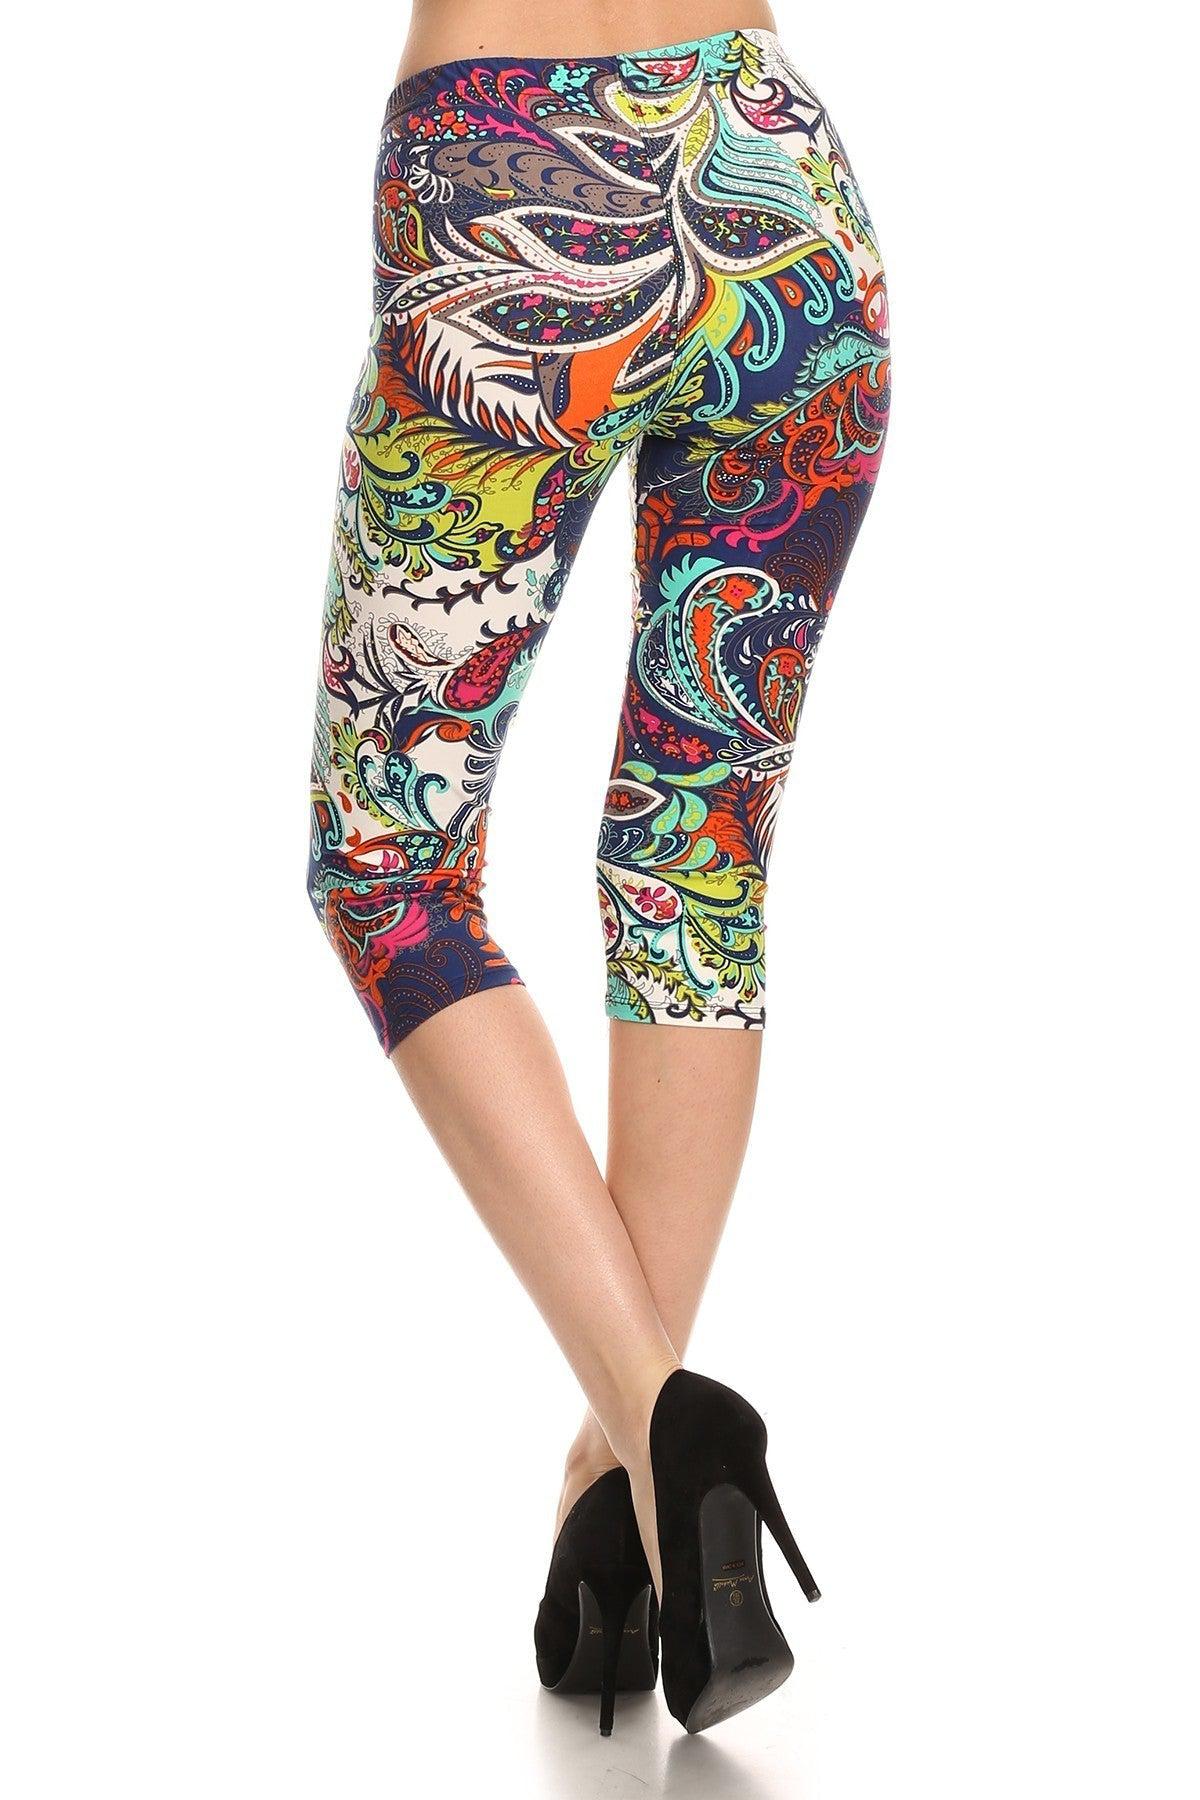 Multi-color Ornate Print Cropped Length Fitted Leggings With High Elastic Waist.-TOPS / DRESSES-[Adult]-[Female]-Multi-Blue Zone Planet